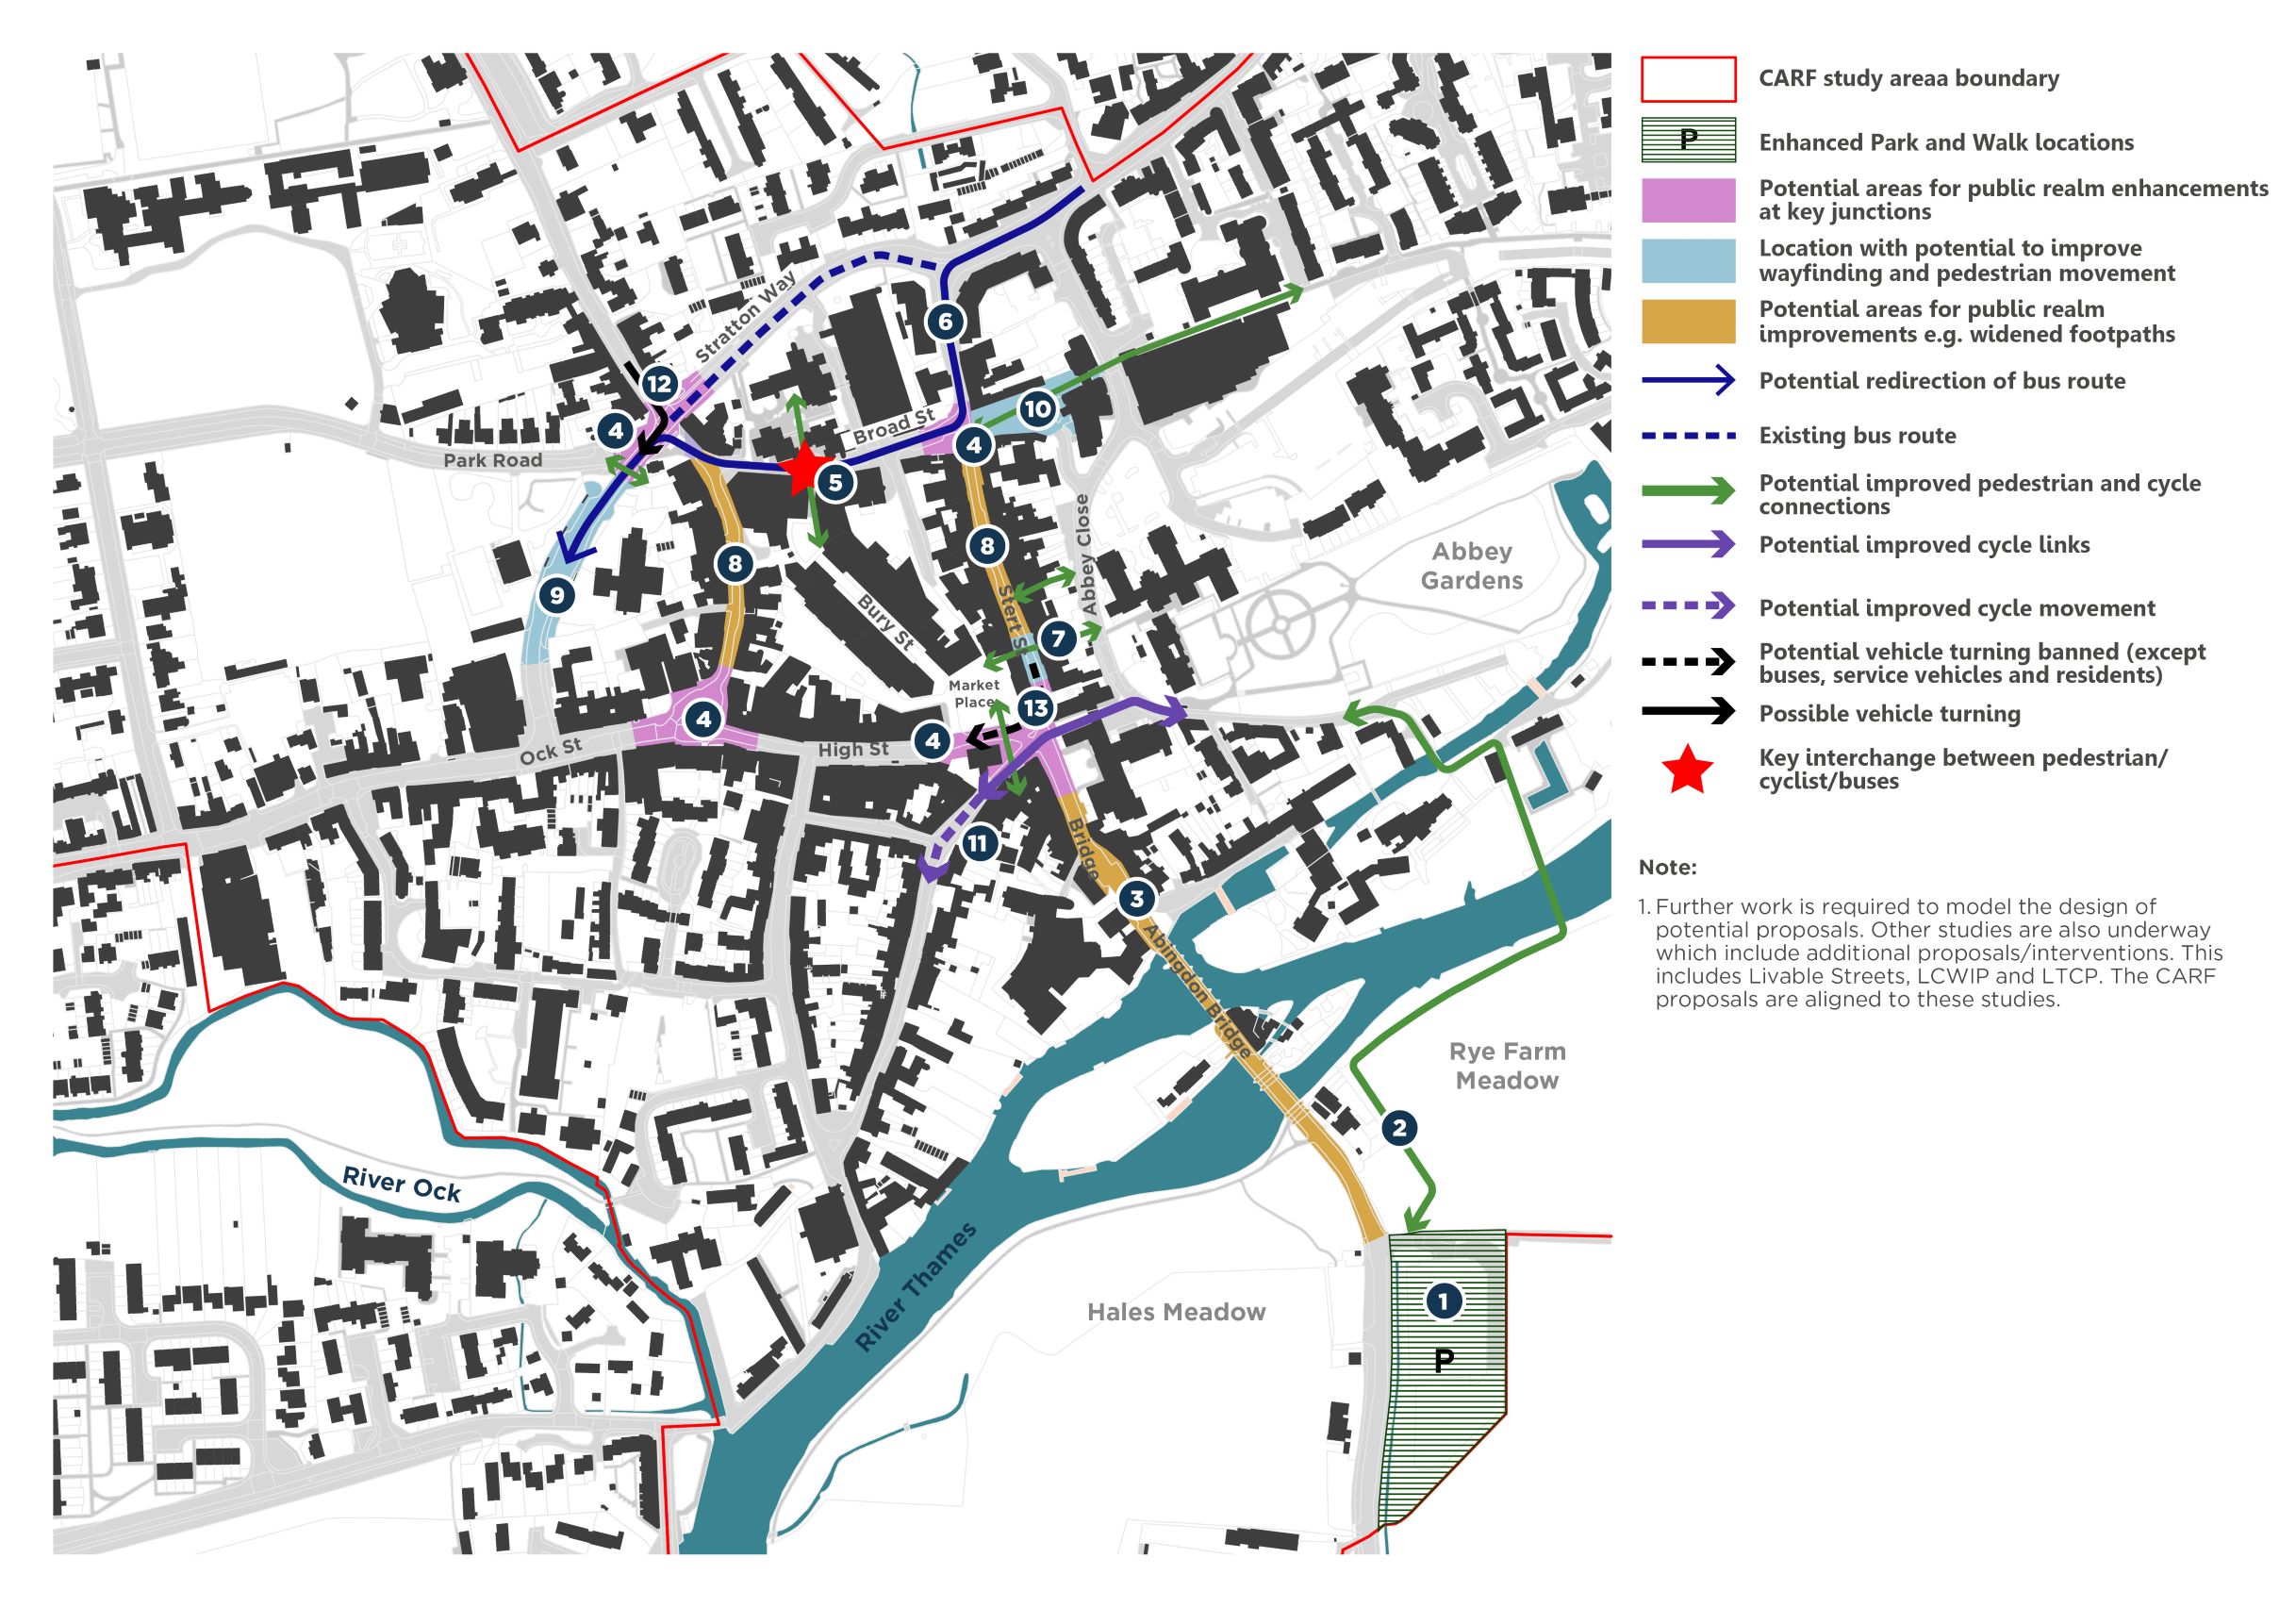 Supporting image to Potential Major Public Realm Improvements showing the CARF study area and locations of suggested improvements, denoted by numbers that relate to the following list of interventions. A note sits alongside the plan to confirm that further work is required to model the design of potential proposals, and highlights the additional studies underway, such as the LCWIP and LTCP, which will also propose specific improvements.